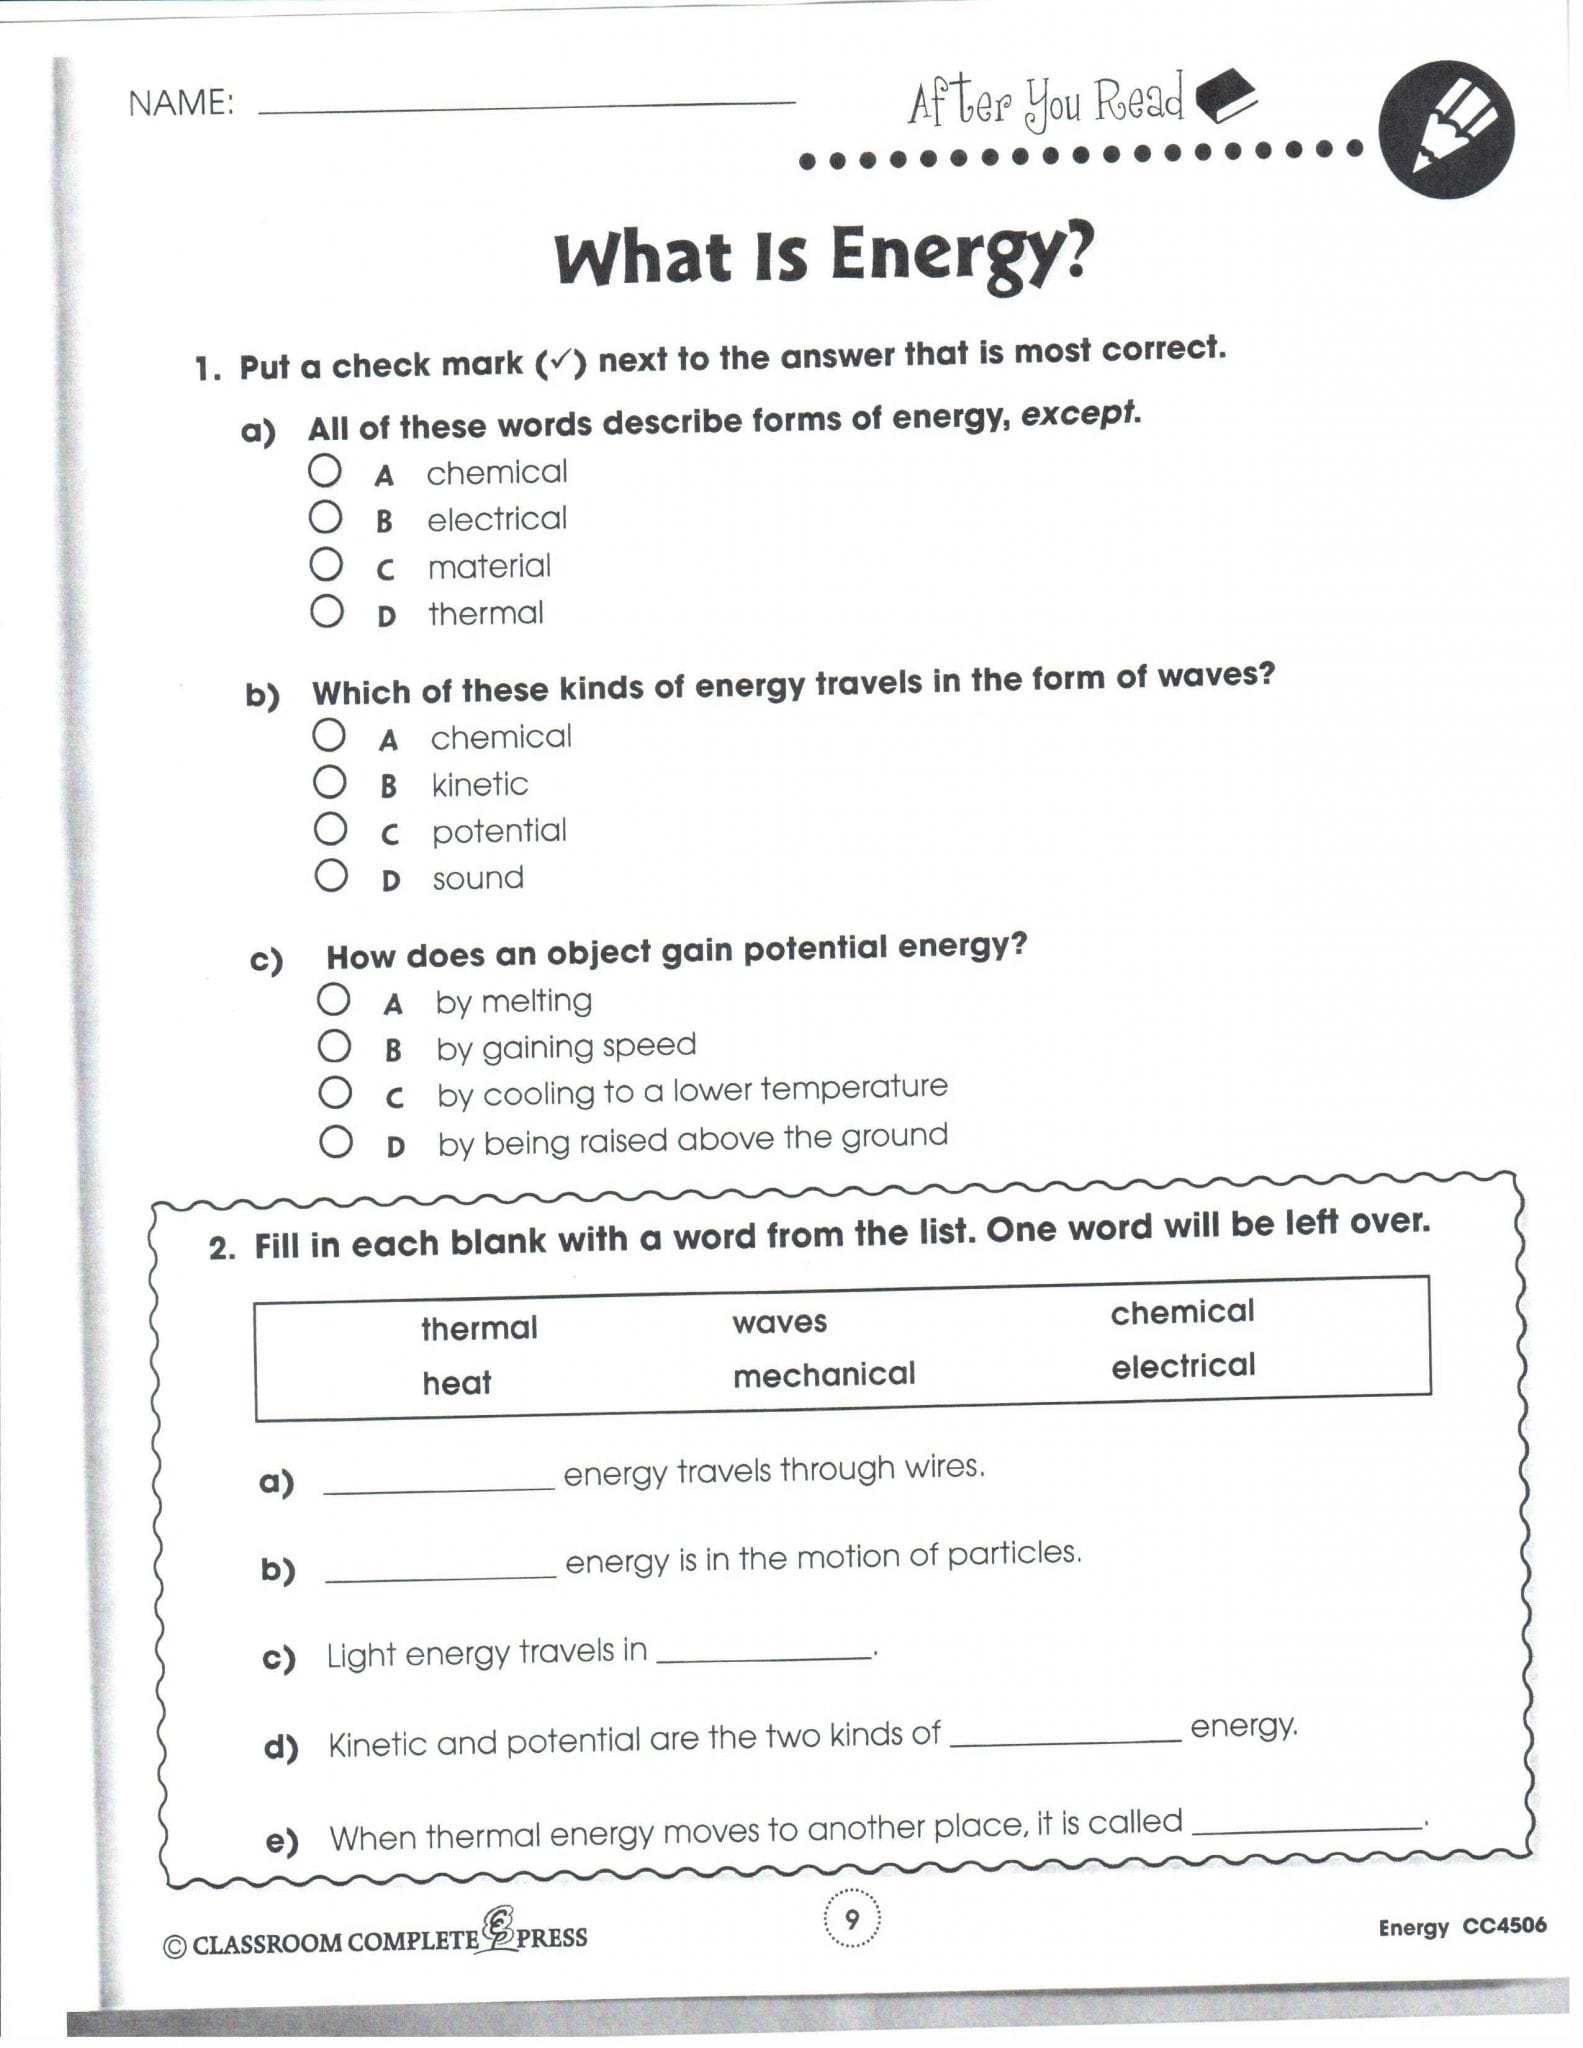 Bill Nye Pollution Solutions Worksheet Answers db excel com